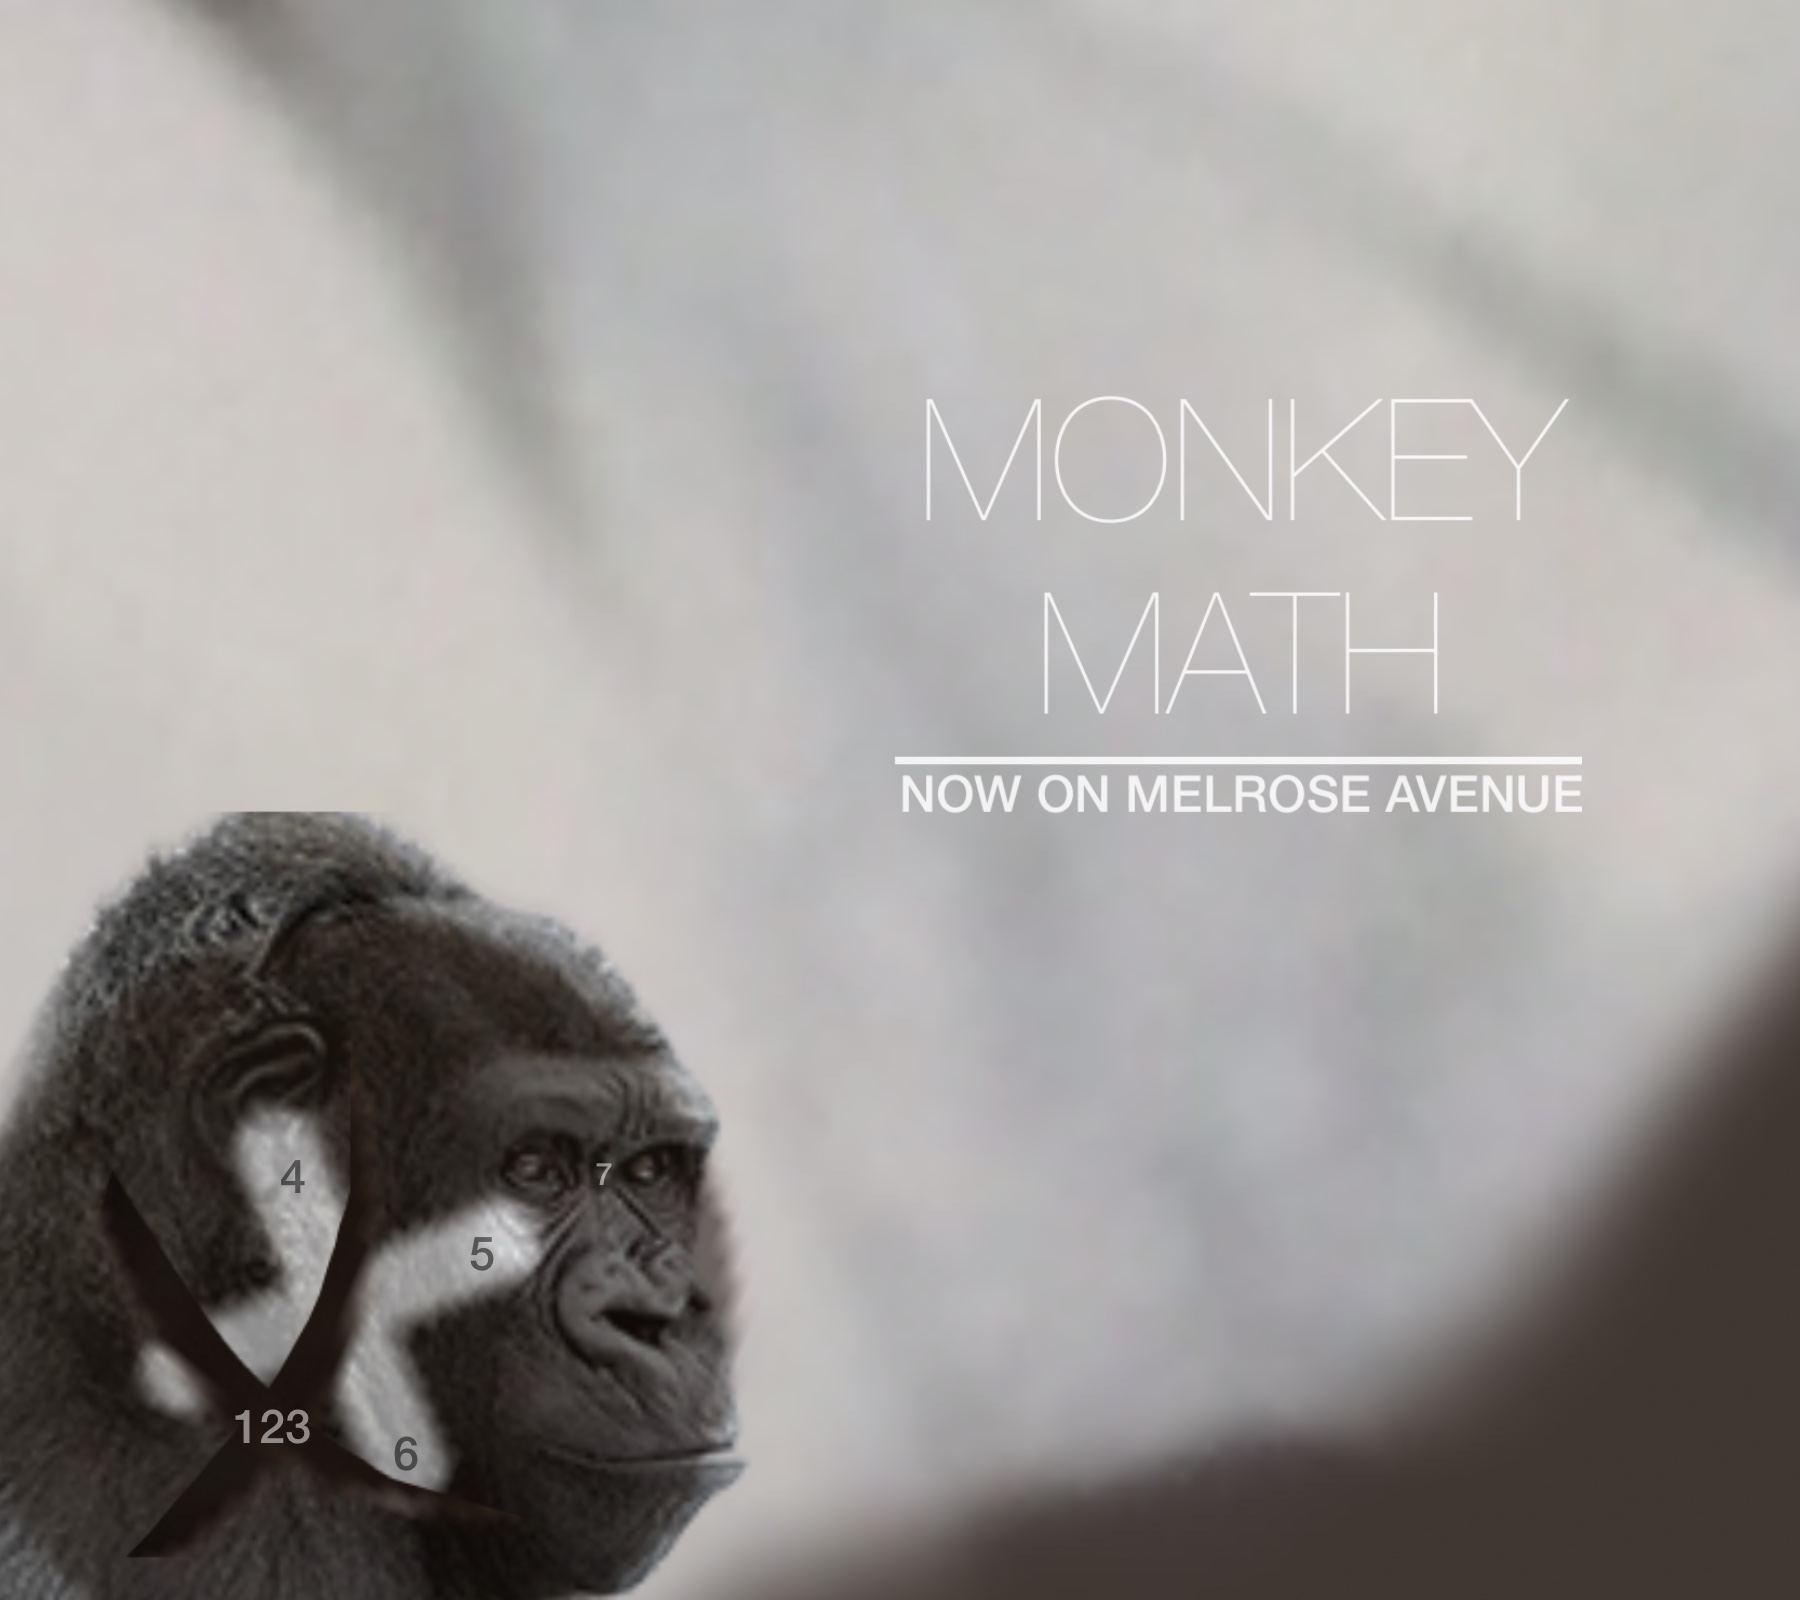 MONKEY MATH IS NOW ON MELROSE